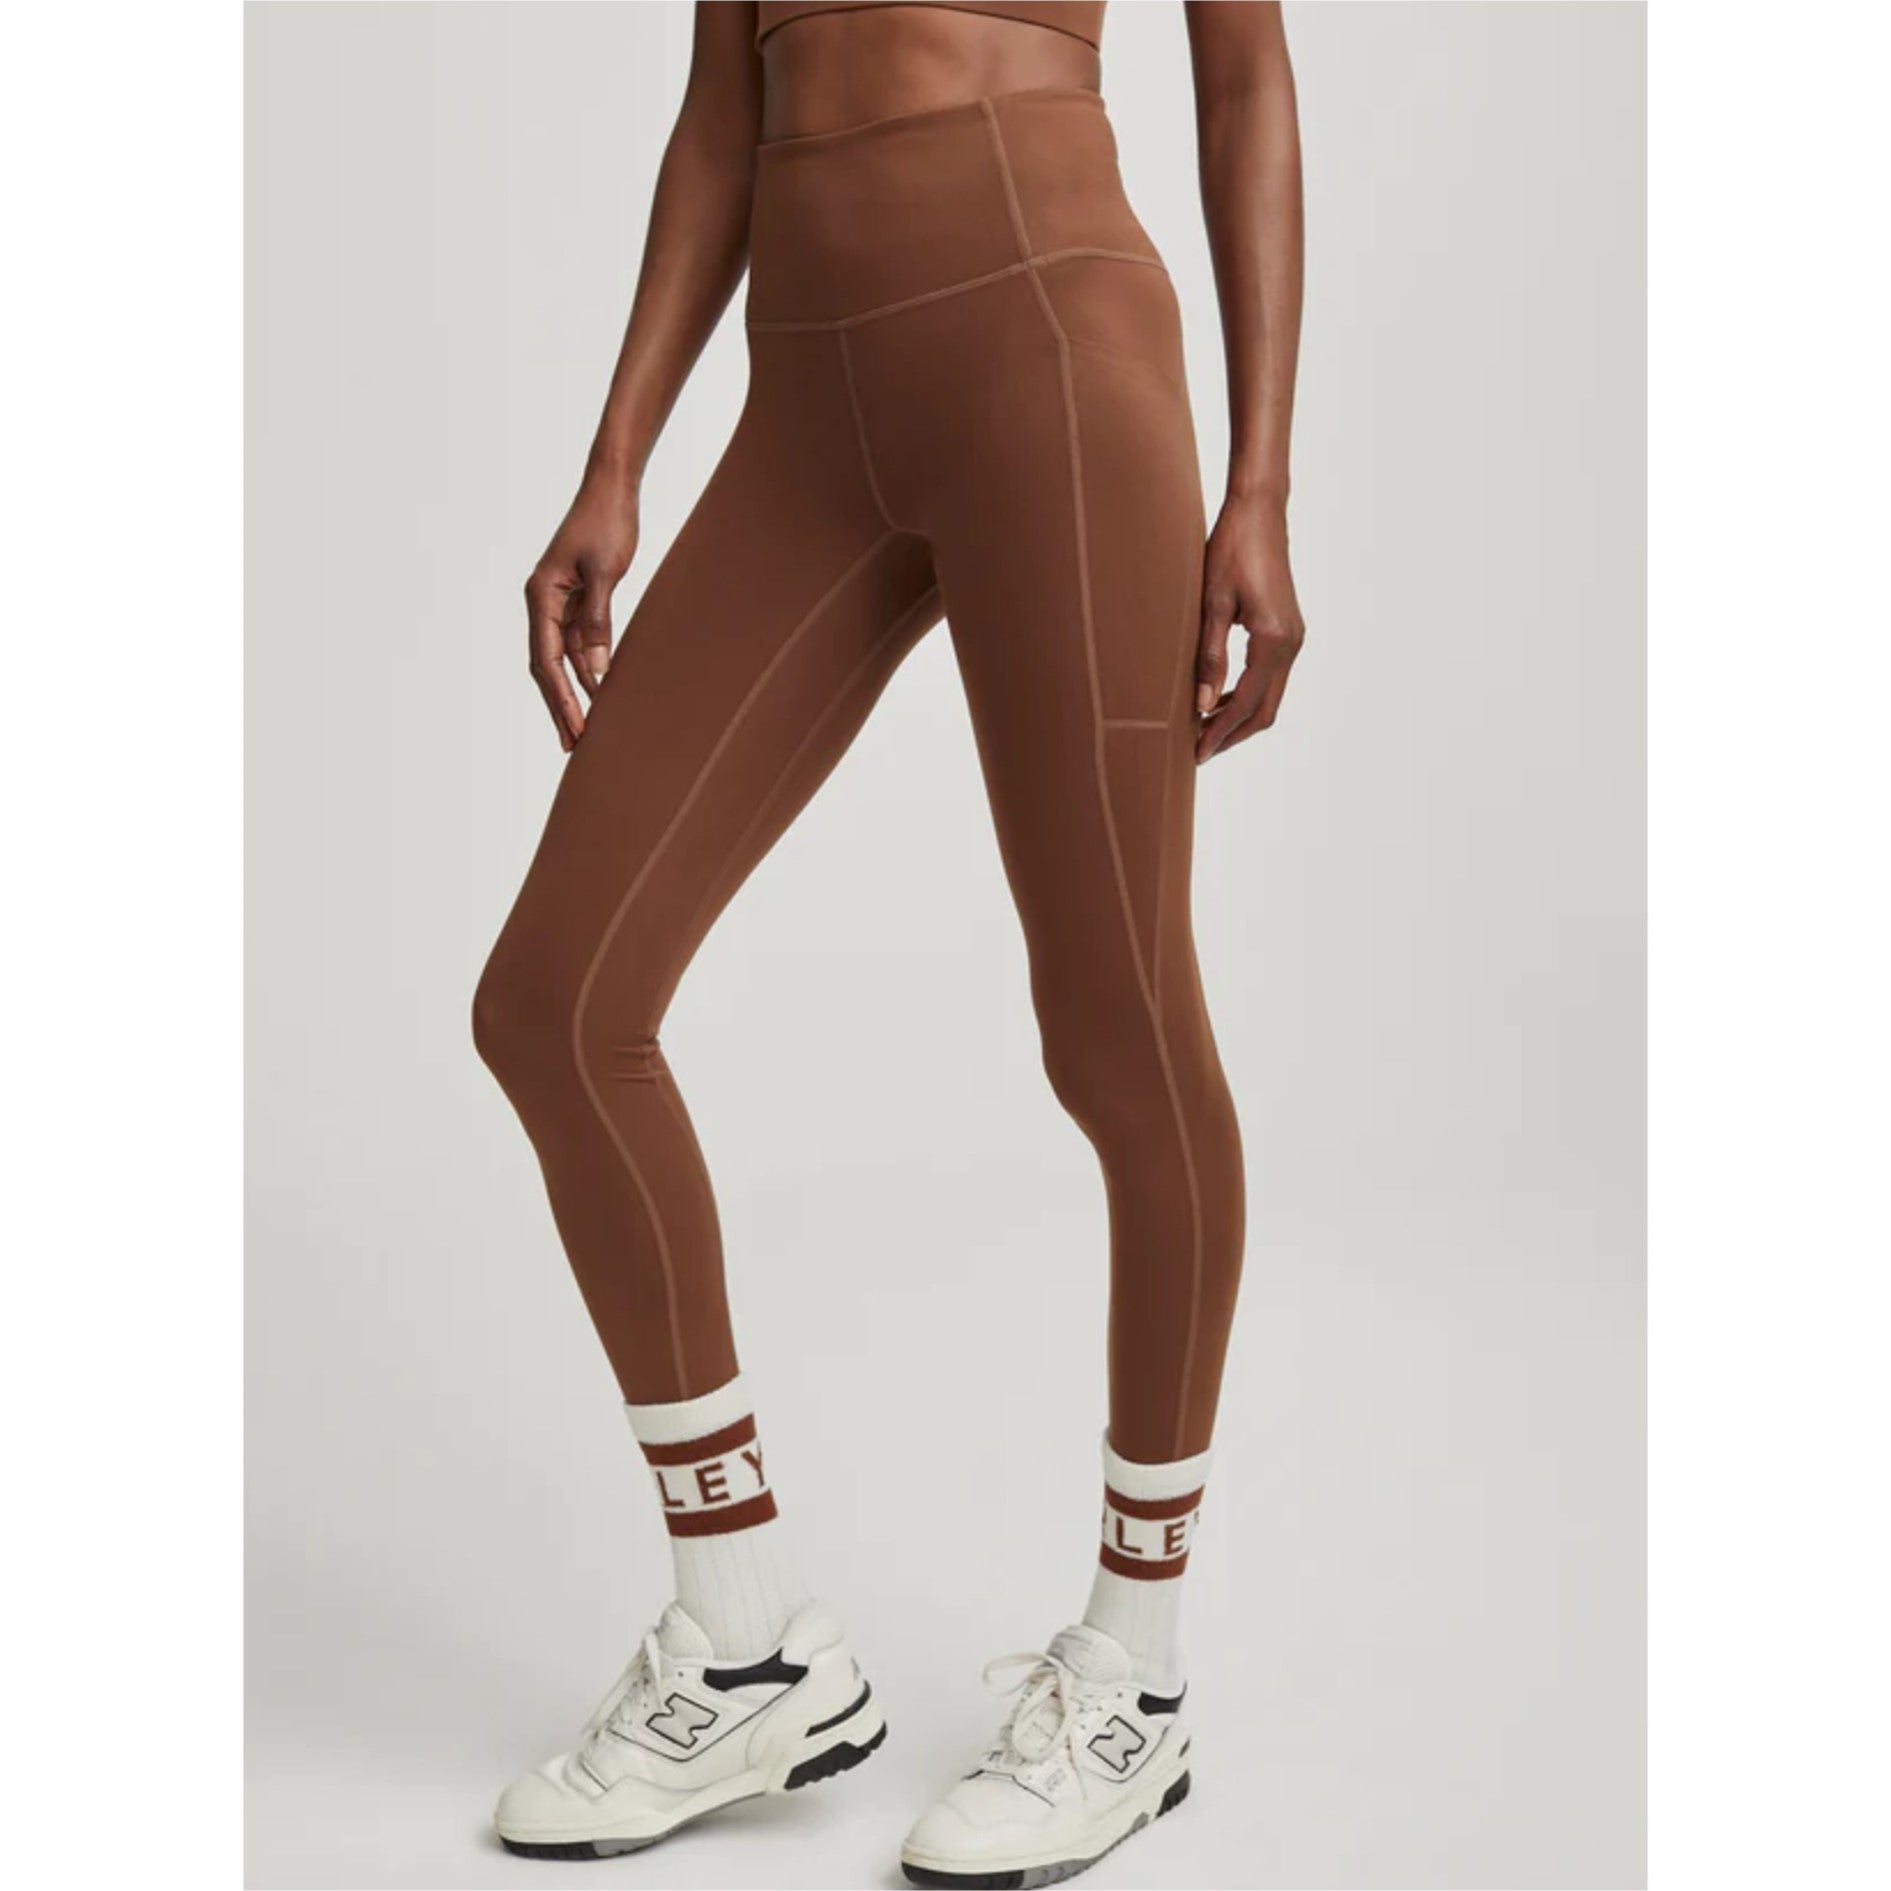 Let's Move 25 High Rise Pocket Leggings - Cocoa Brown Cocoa Brown / XS